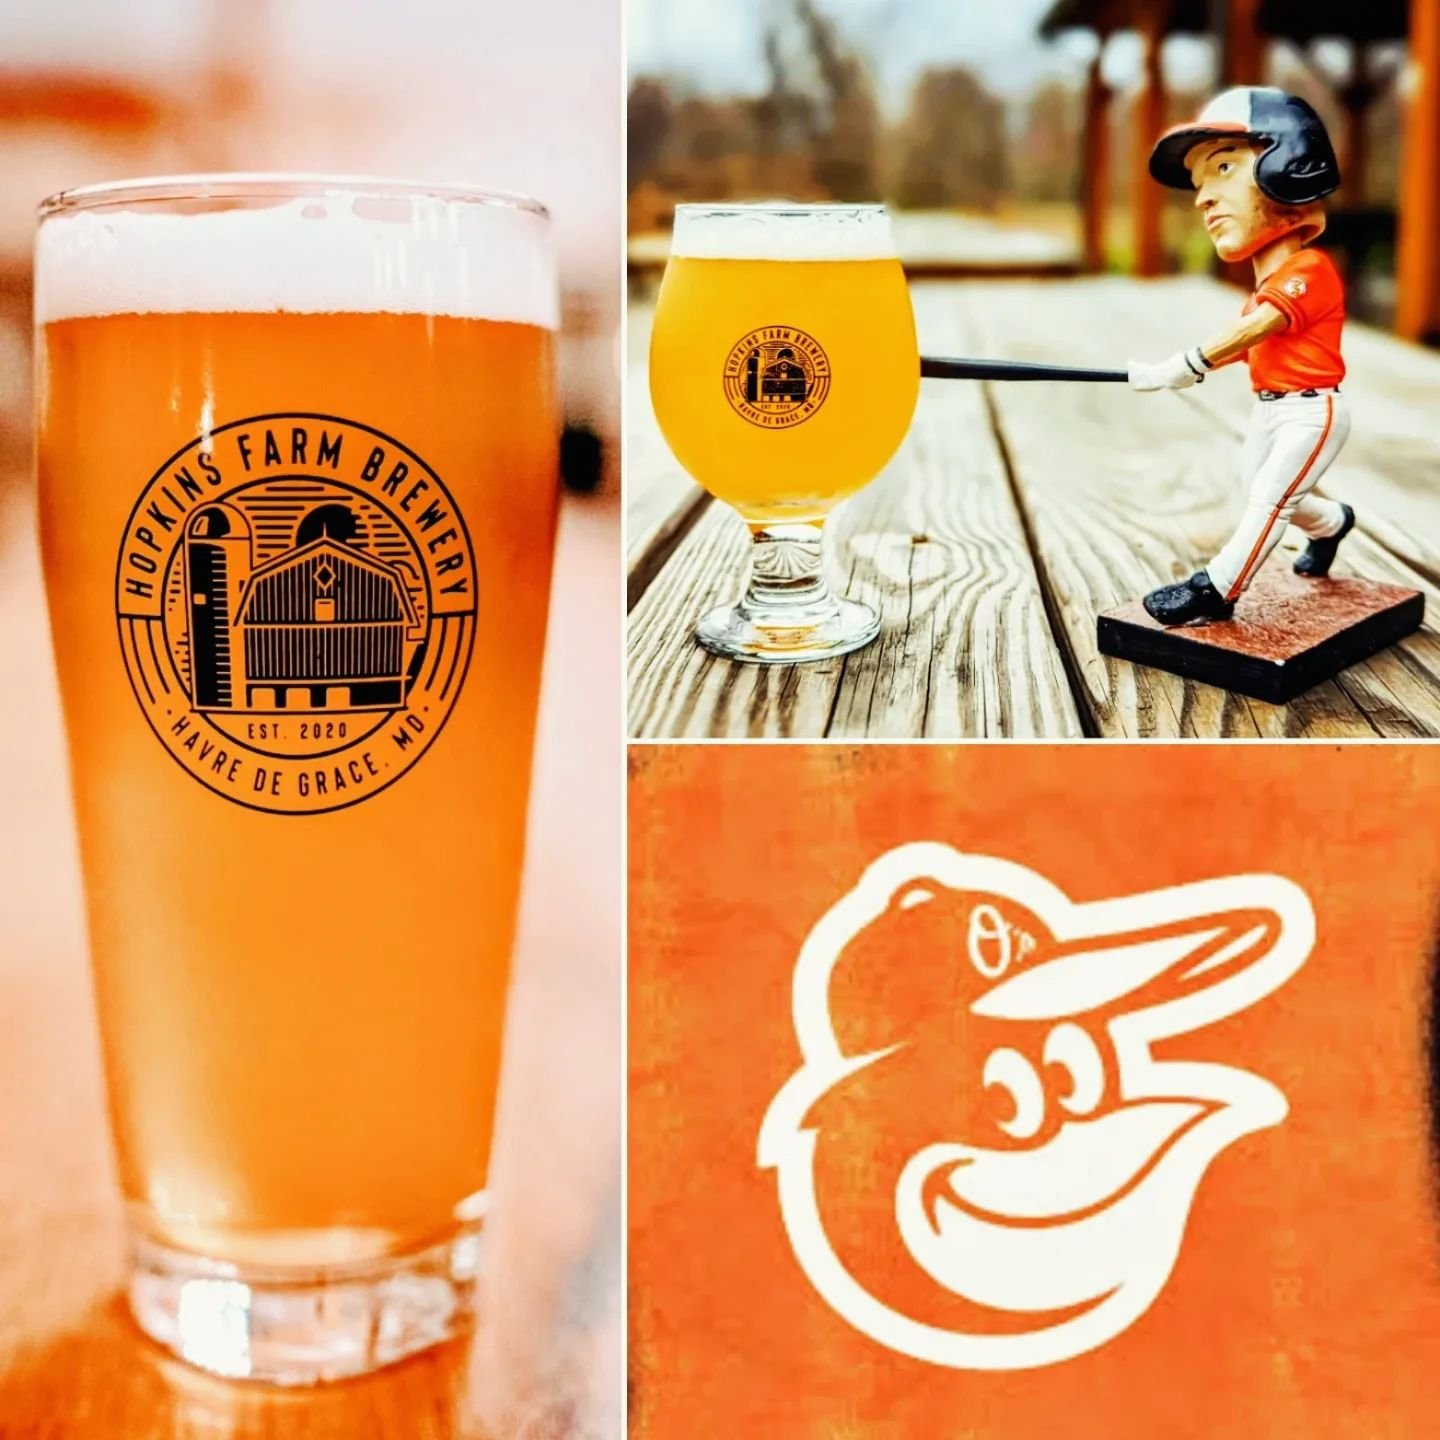 ⚾Let's go O's! We're open early today for the Orioles vs Yankees game at 1PM! Enjoy pitcher specials during the game, grab a pit sandwich  from @oldlinegrill at 3PM, then stay for Downtime Networking at 5PM, and live music with @dustinwademusic at 5: